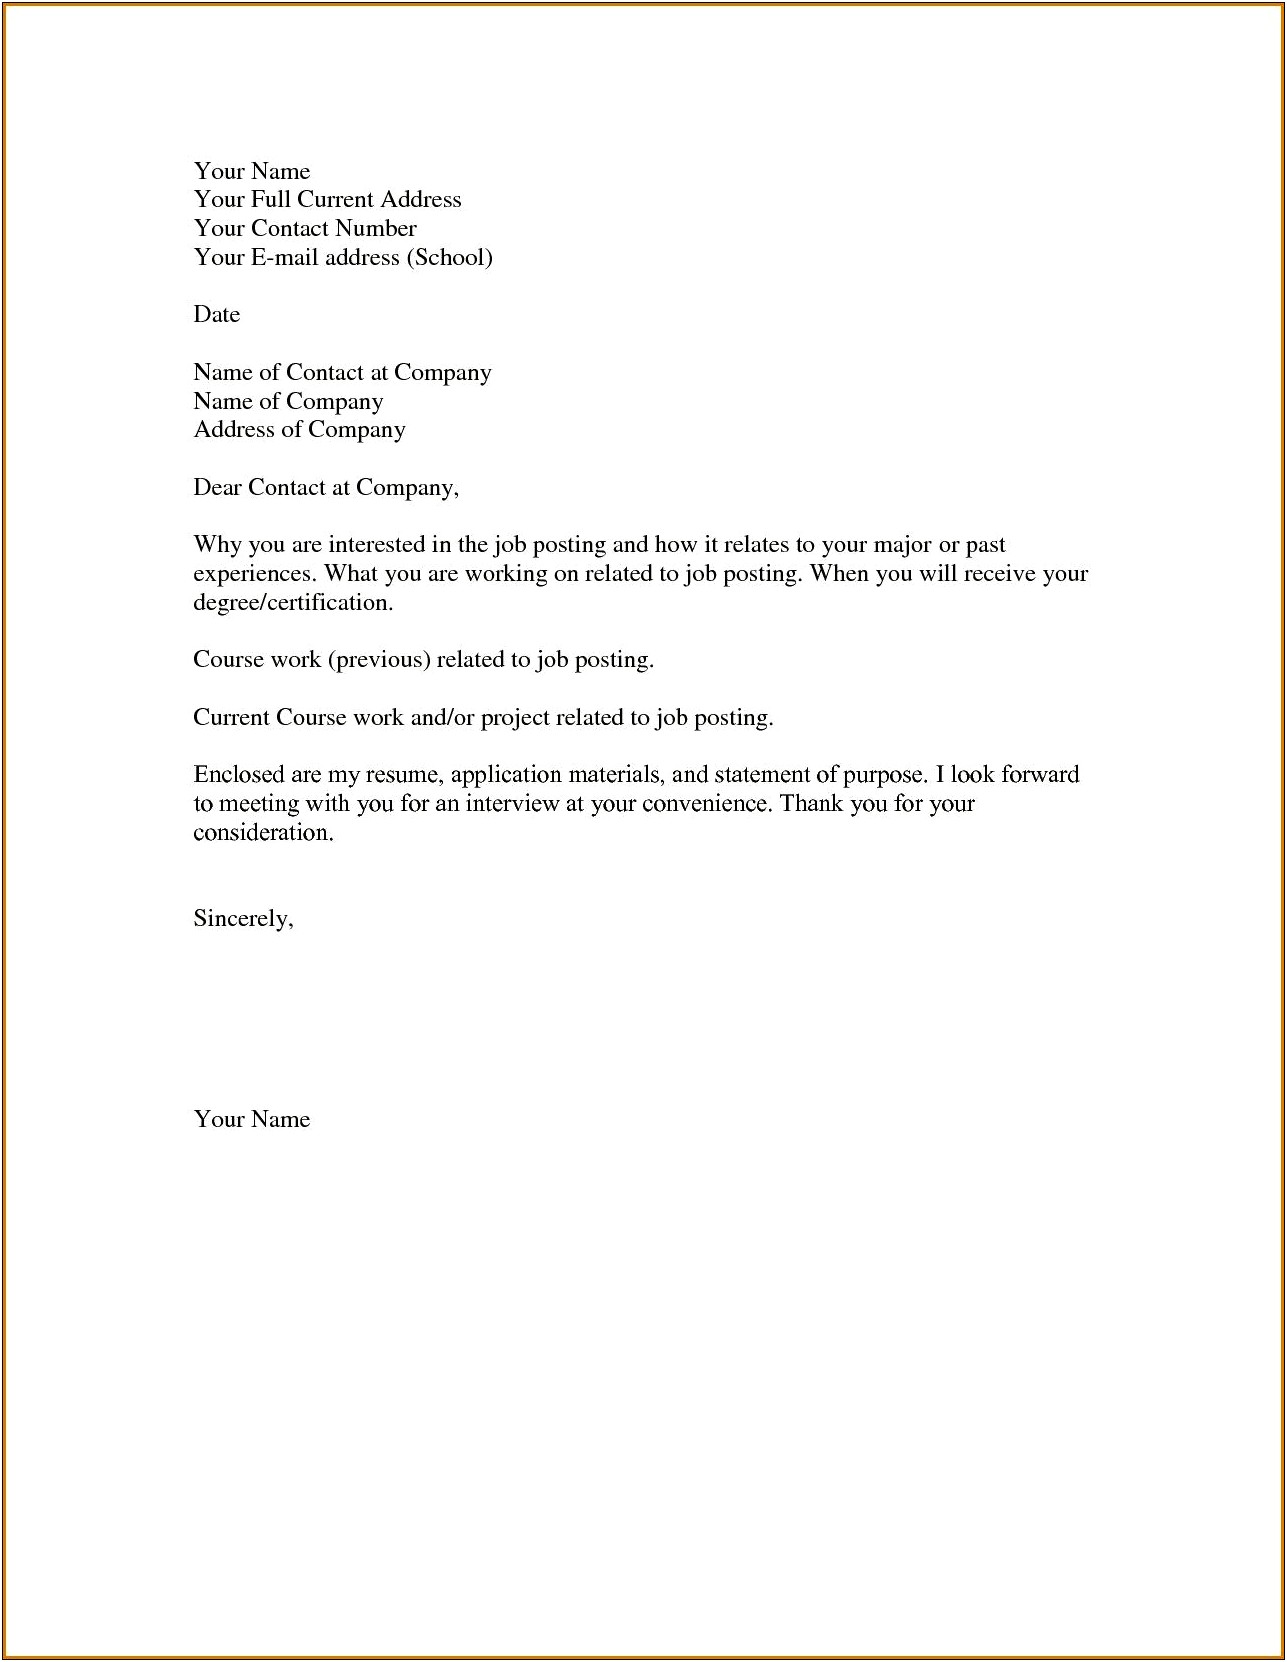 Sample Of A Simple Cover Letter For Resume